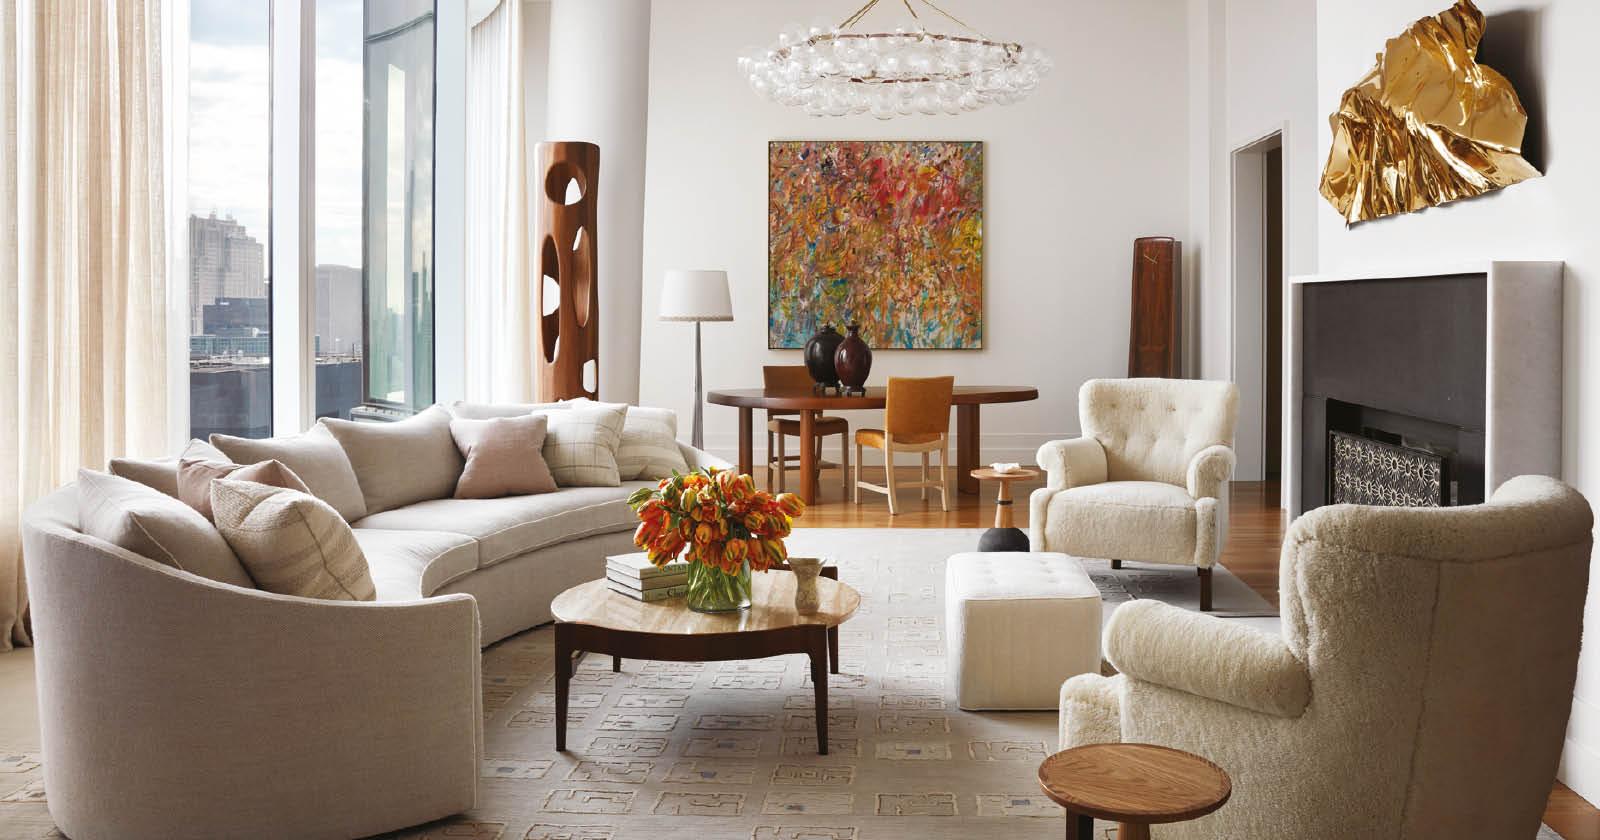 This New York Home is Every Art Lover's Dream